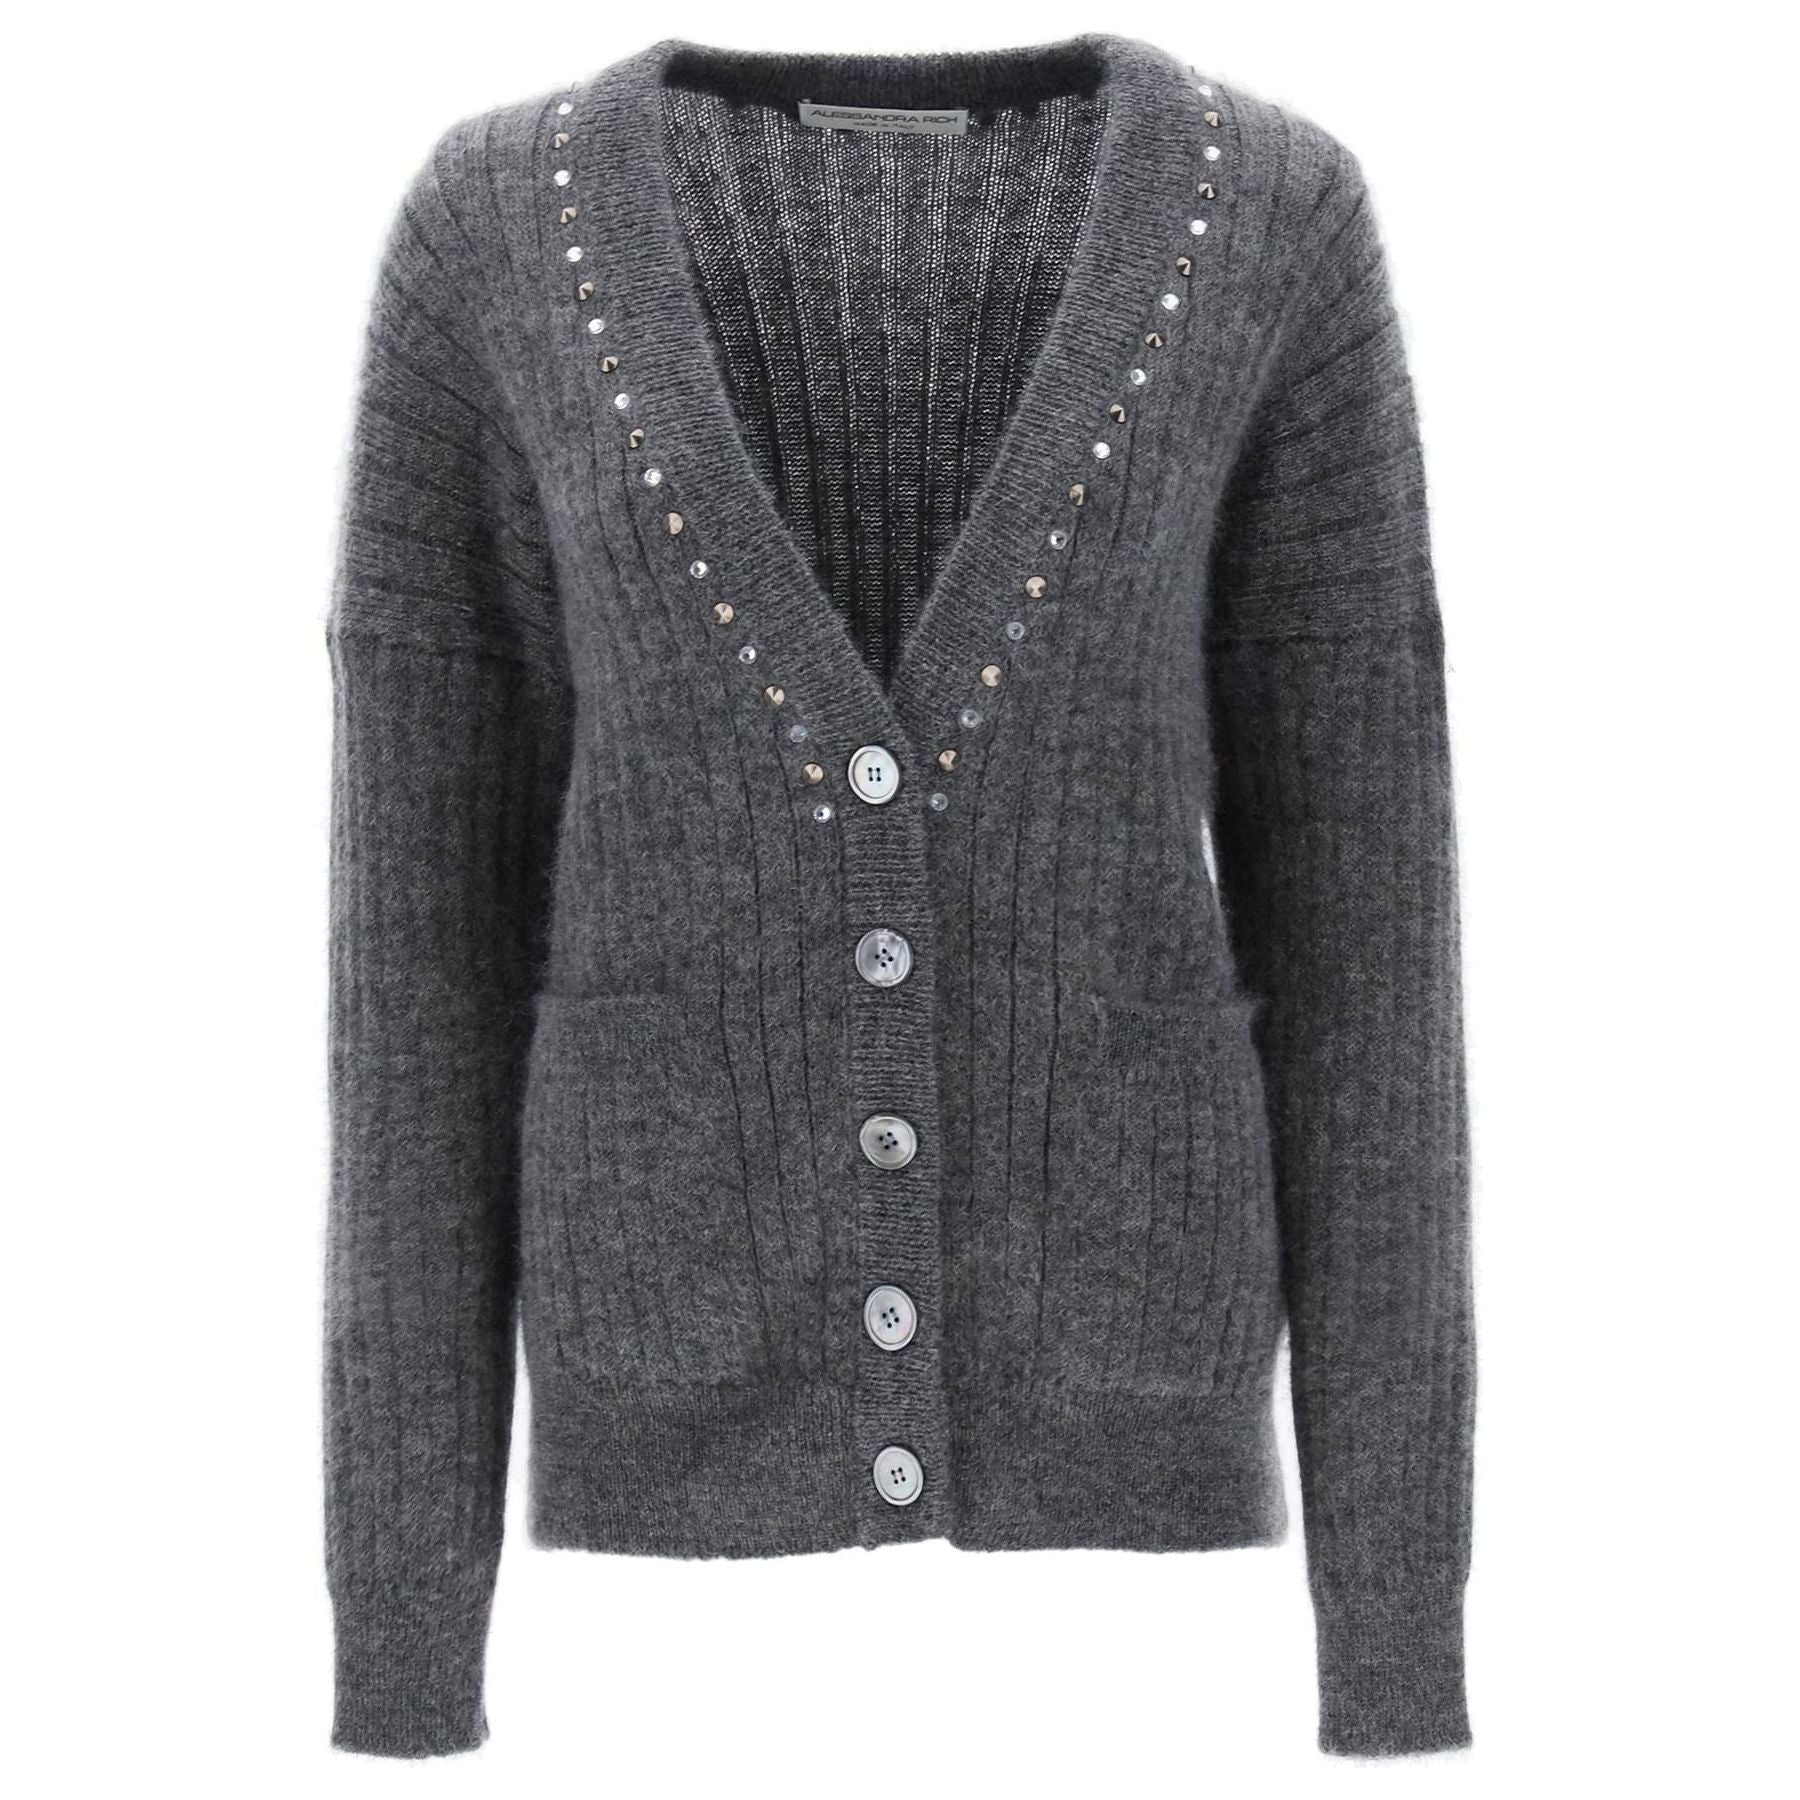 Virgin Wool Blend Ribbed Cardigan with Studs and Crystals